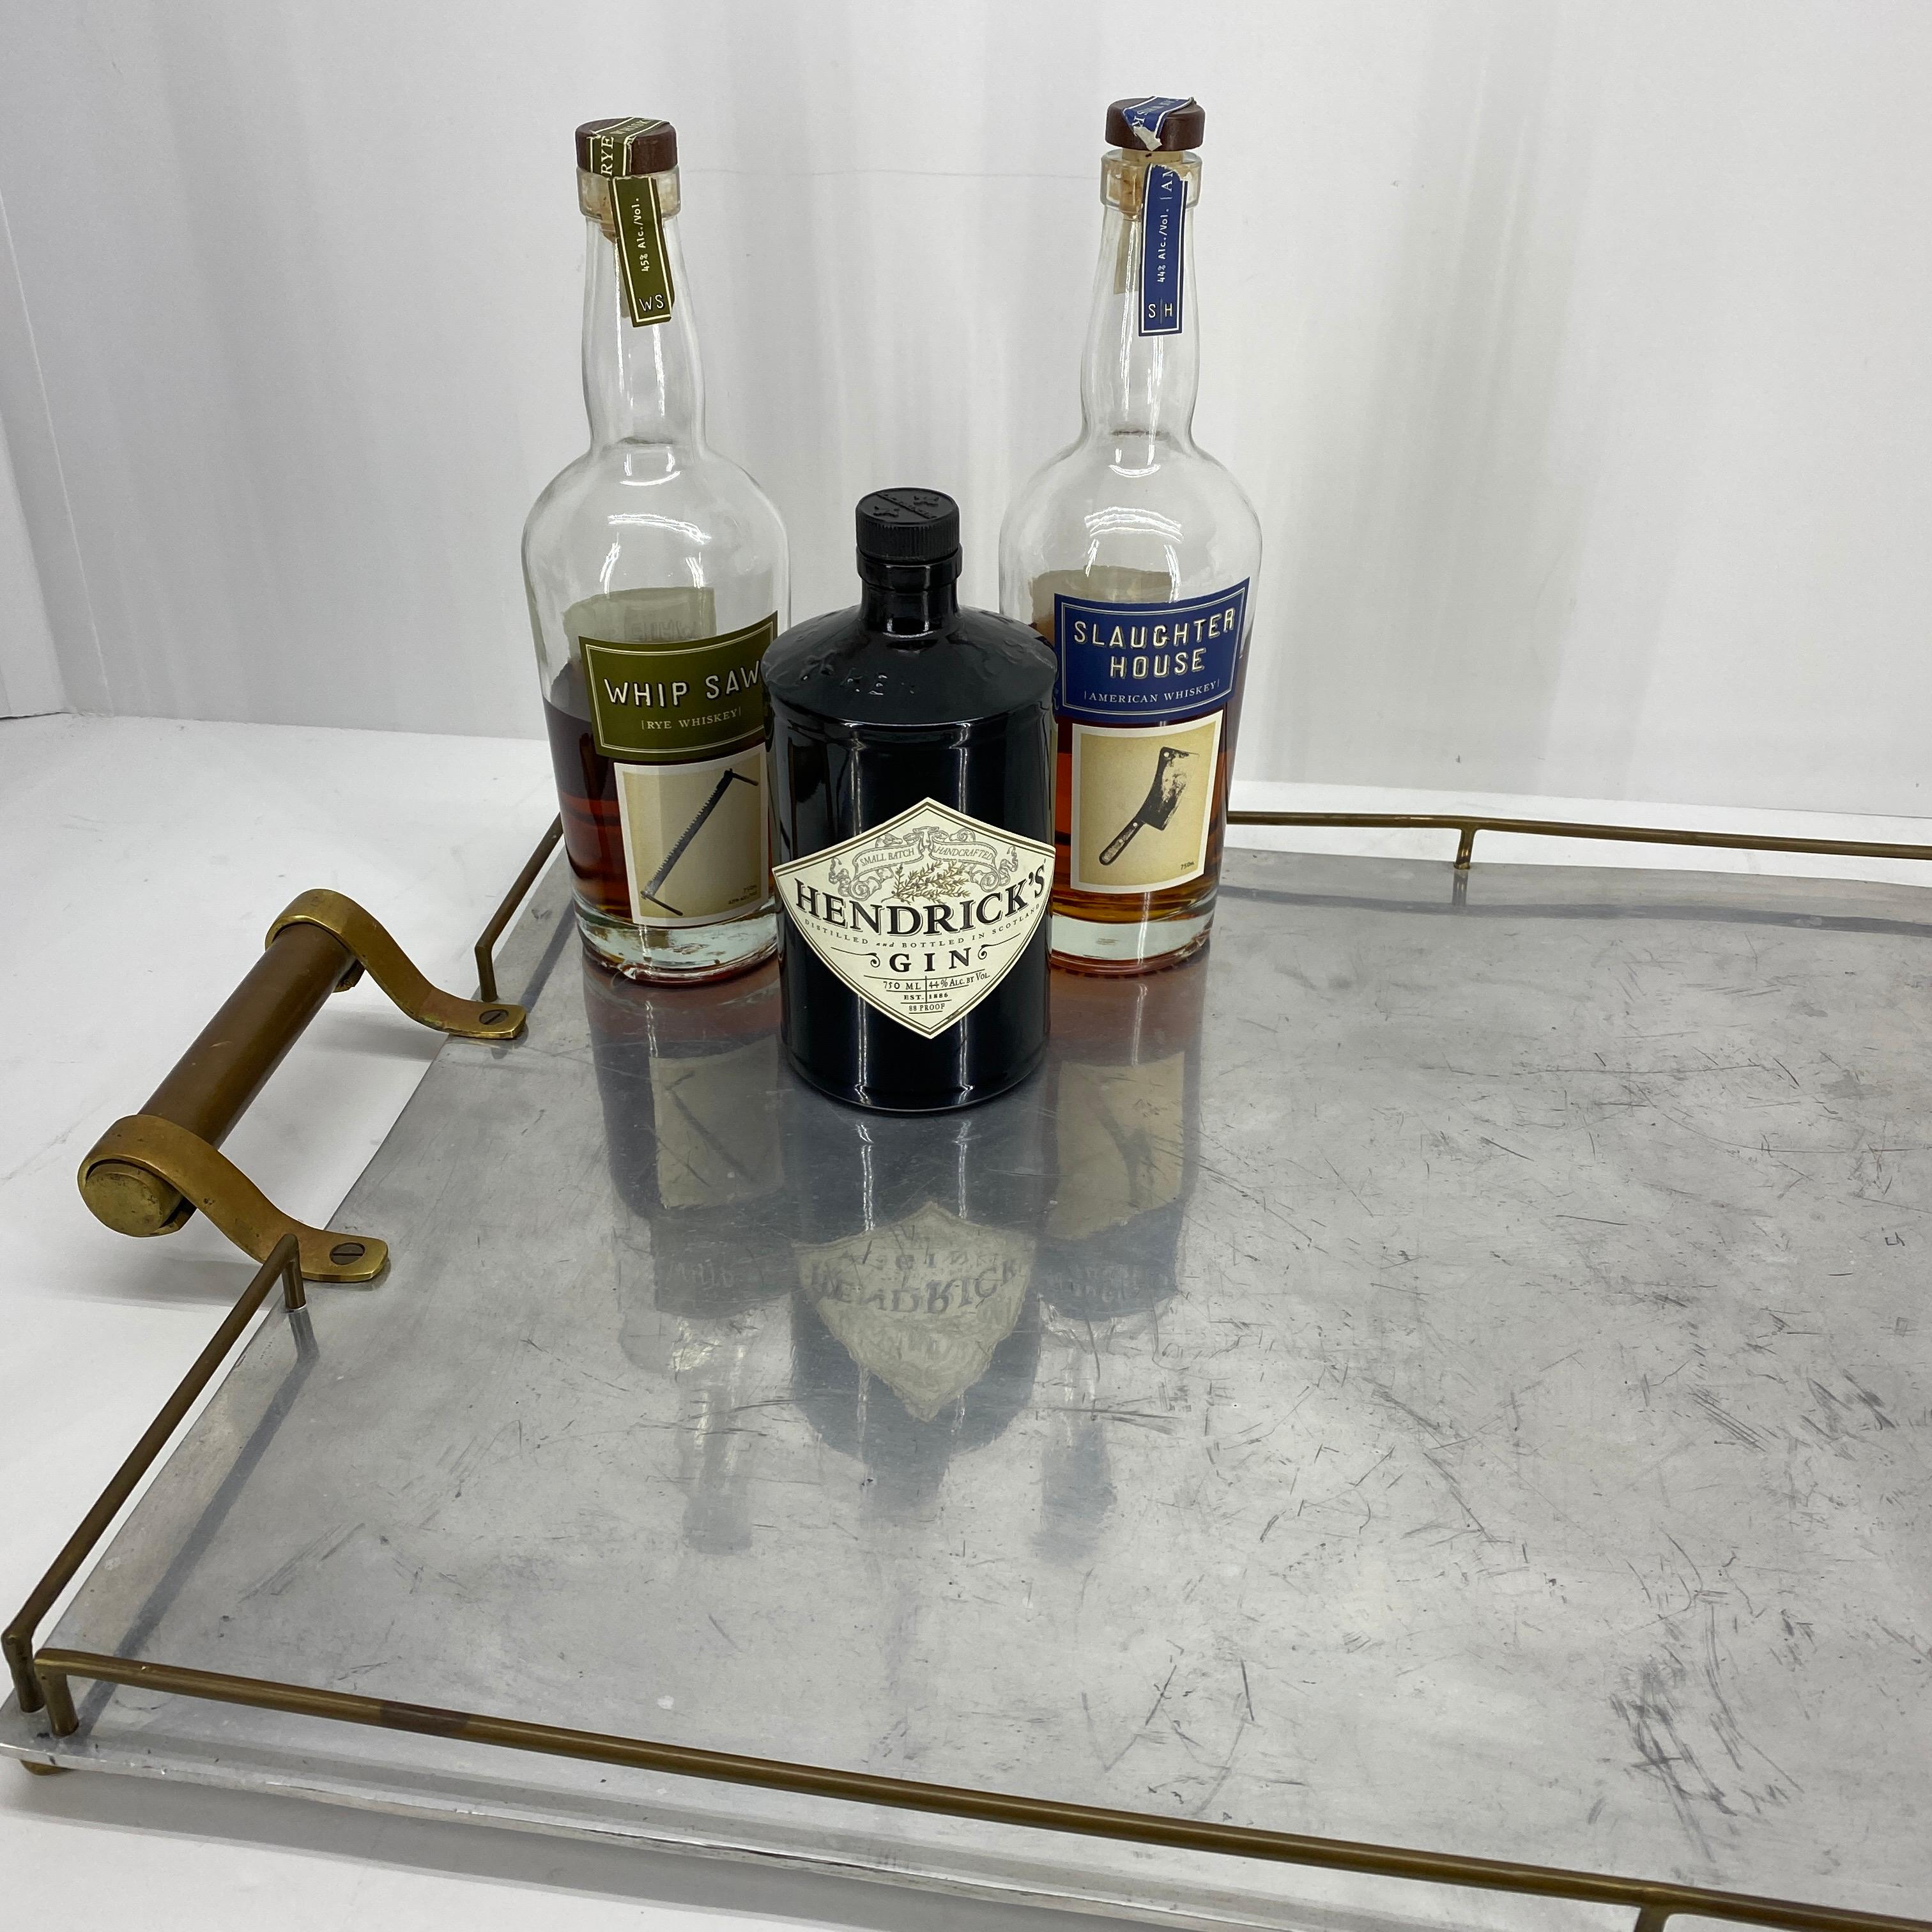 Large rectangular serving tray in chrome and with two side handles in brass. The tray is in great vintage condition. Minor wear consistent with age, one brass bar is bent. Please see detailed images attached.